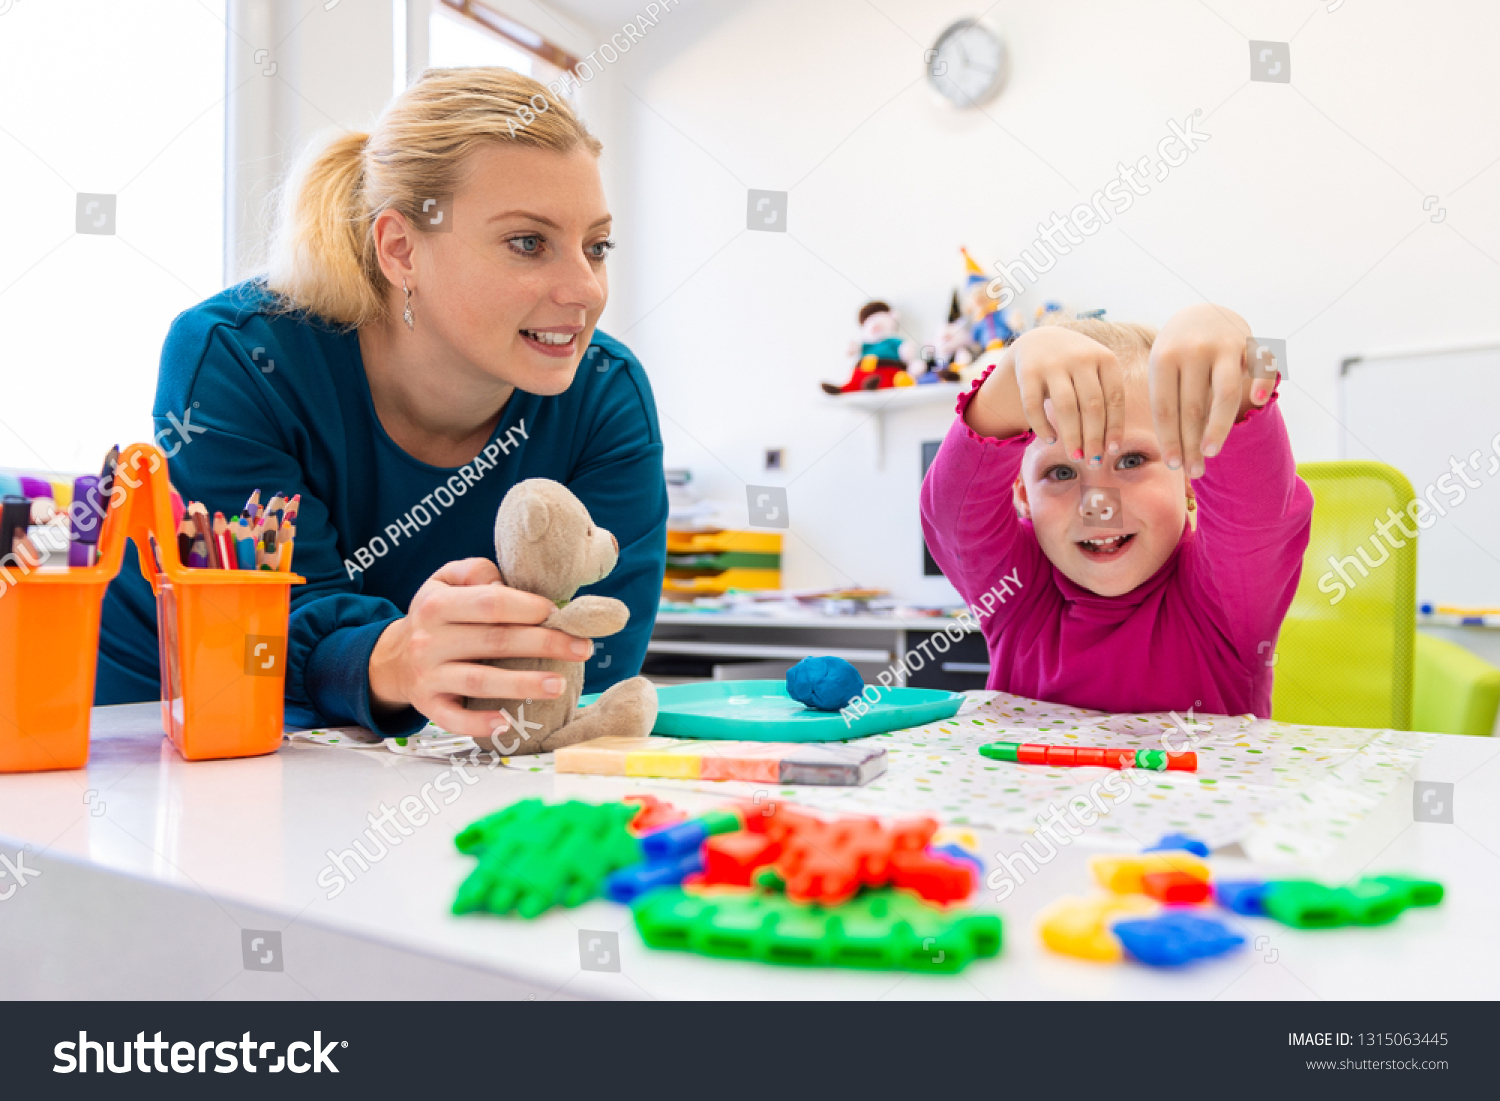 Toddler girl in child occupational therapy session doing sensory playful exercises with her therapist.  #1315063445